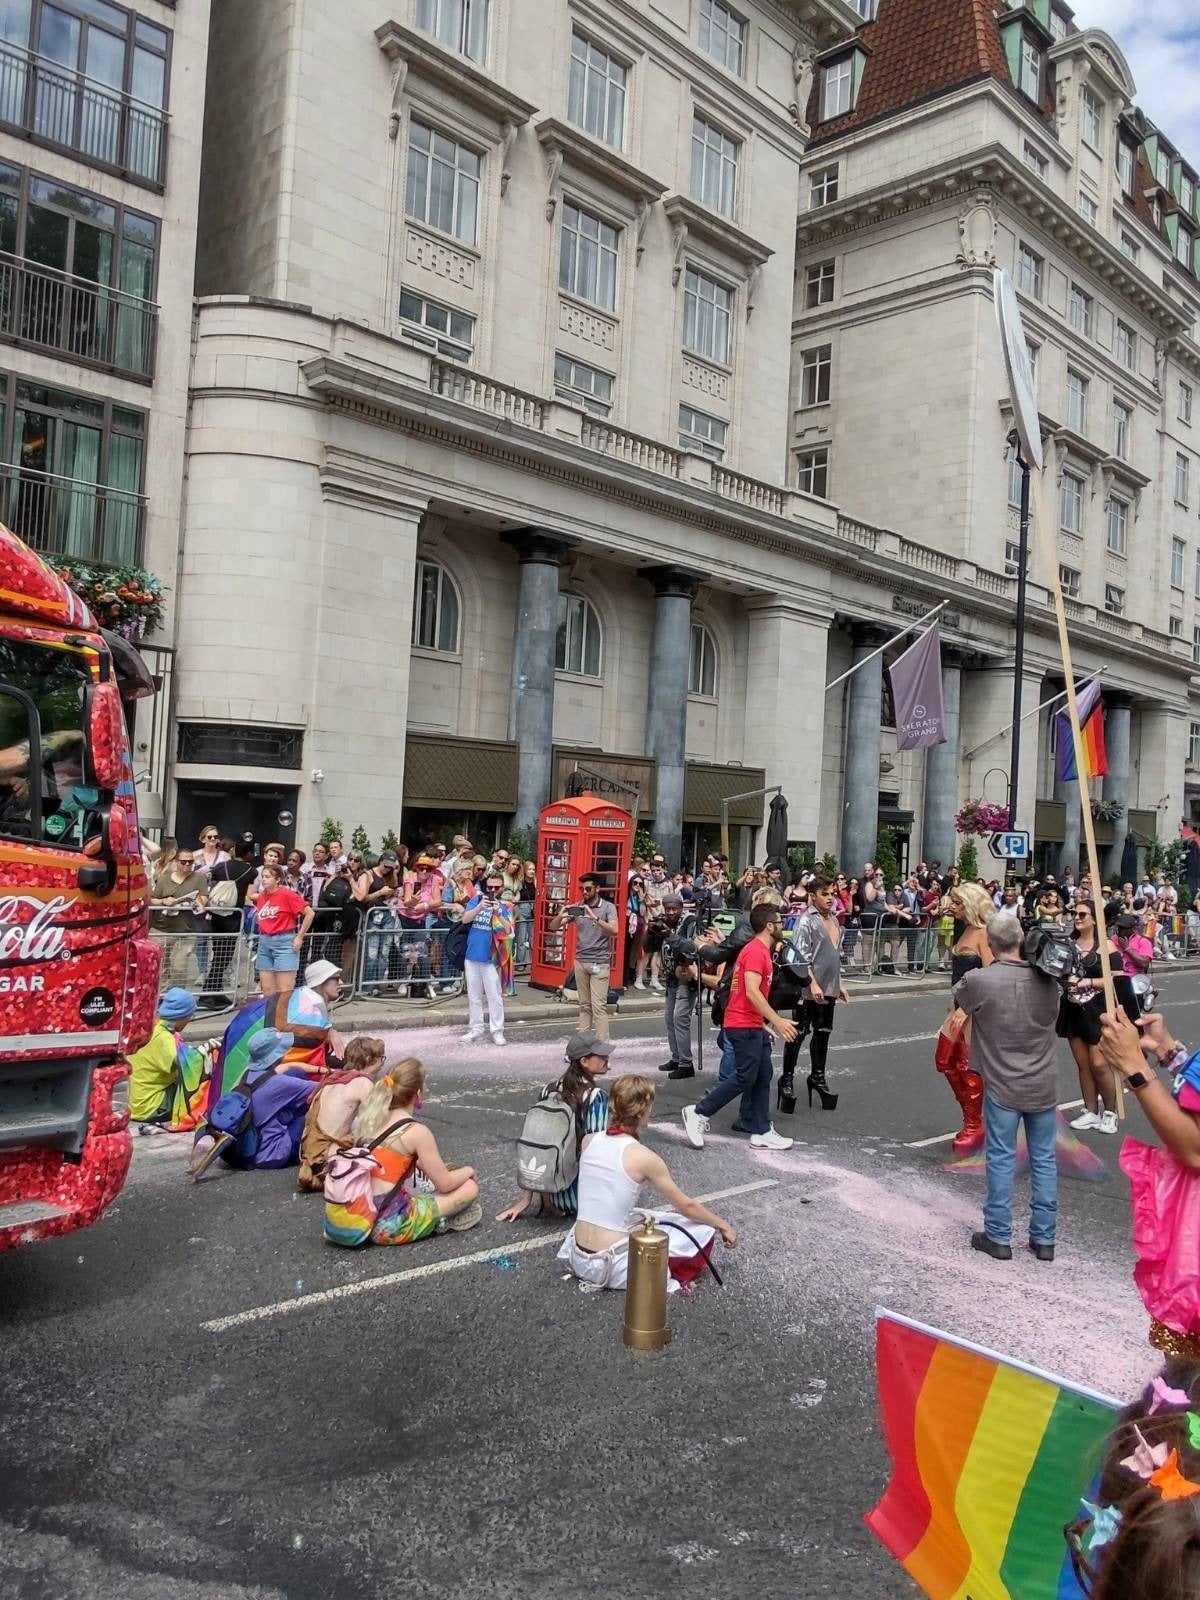 Members of Just Stop Oil protesting the involvement of highly polluting industries at London Pride